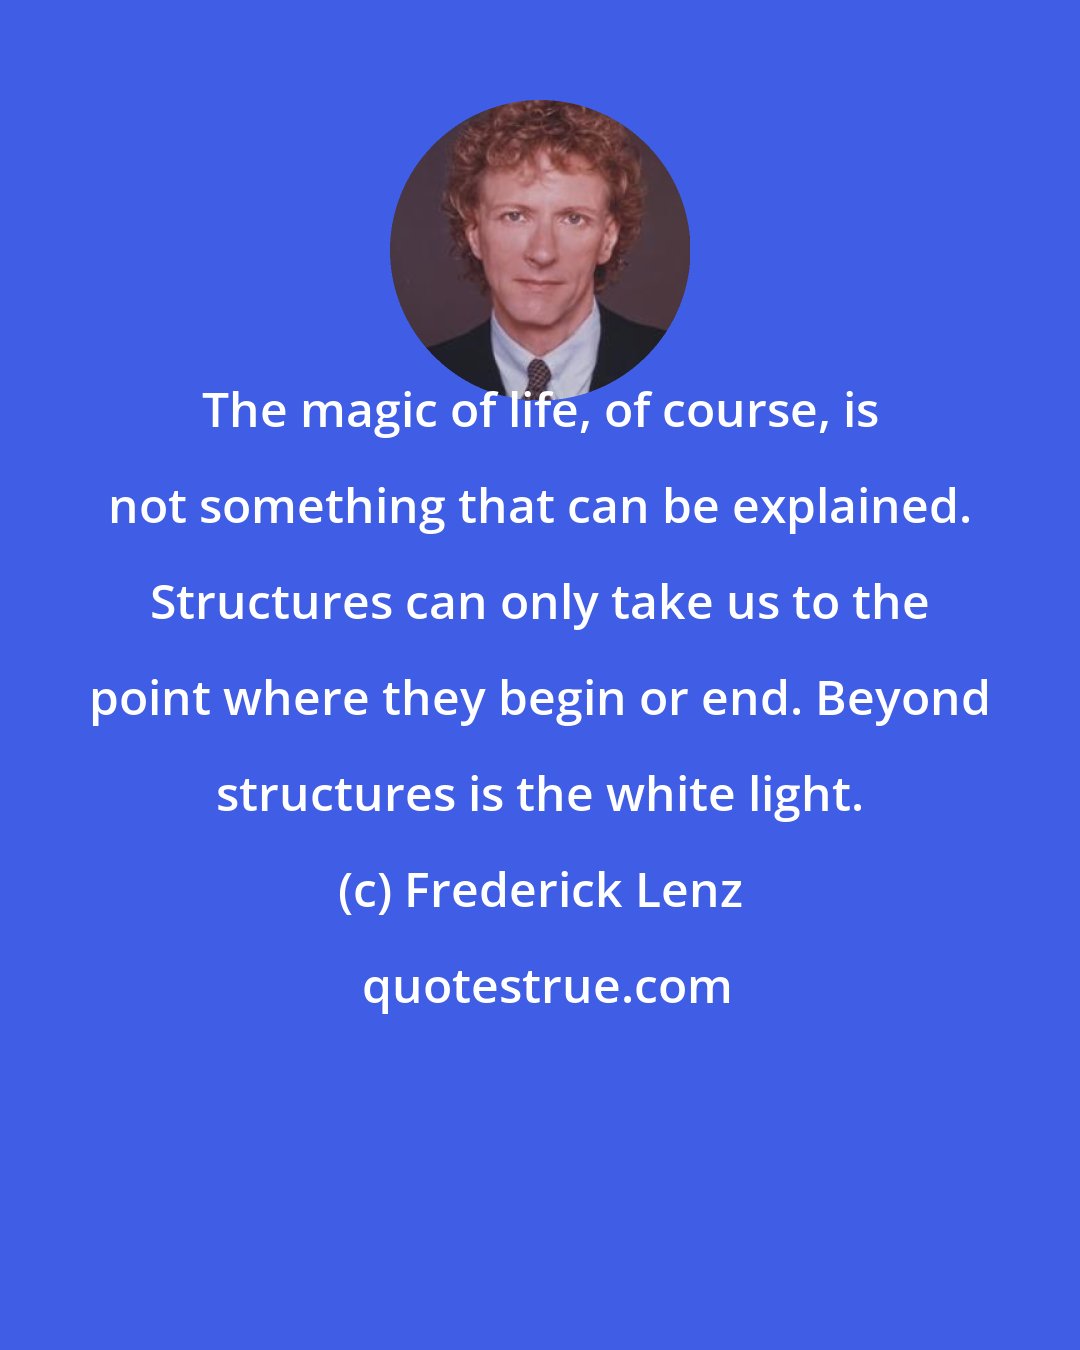 Frederick Lenz: The magic of life, of course, is not something that can be explained. Structures can only take us to the point where they begin or end. Beyond structures is the white light.